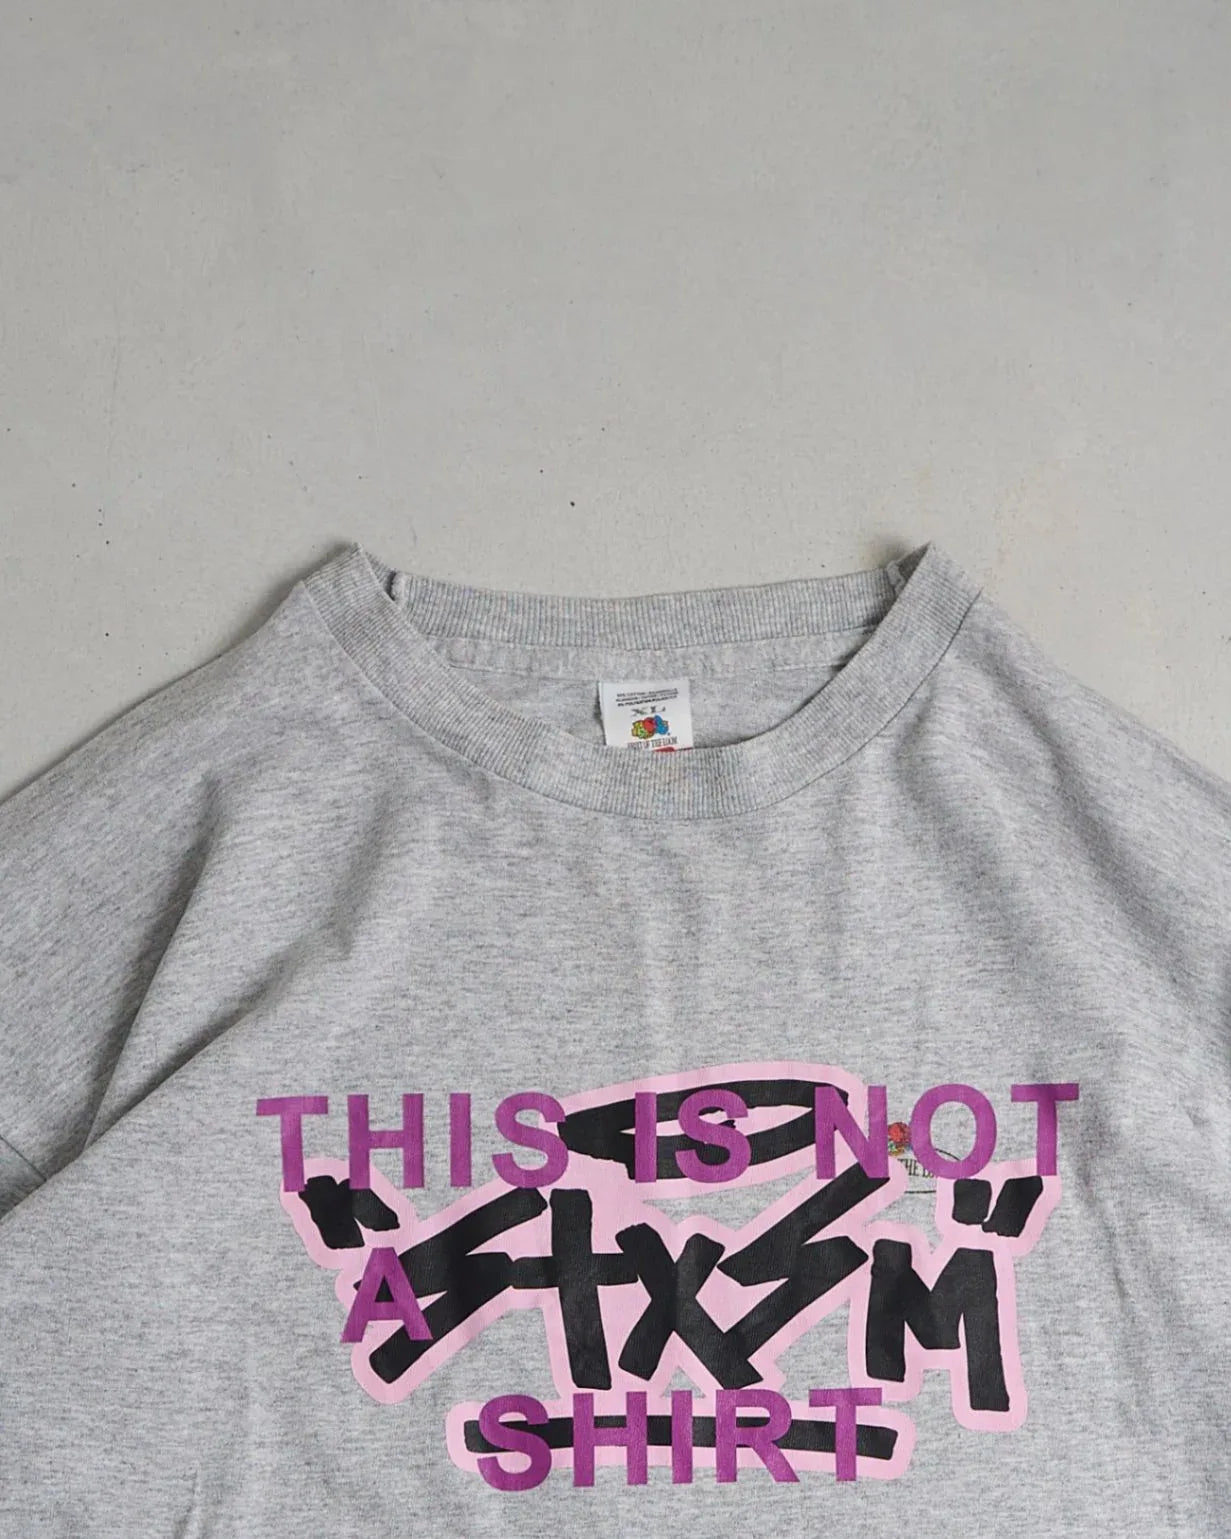 Vintage Staxism Single Stitch T-Shirt Top